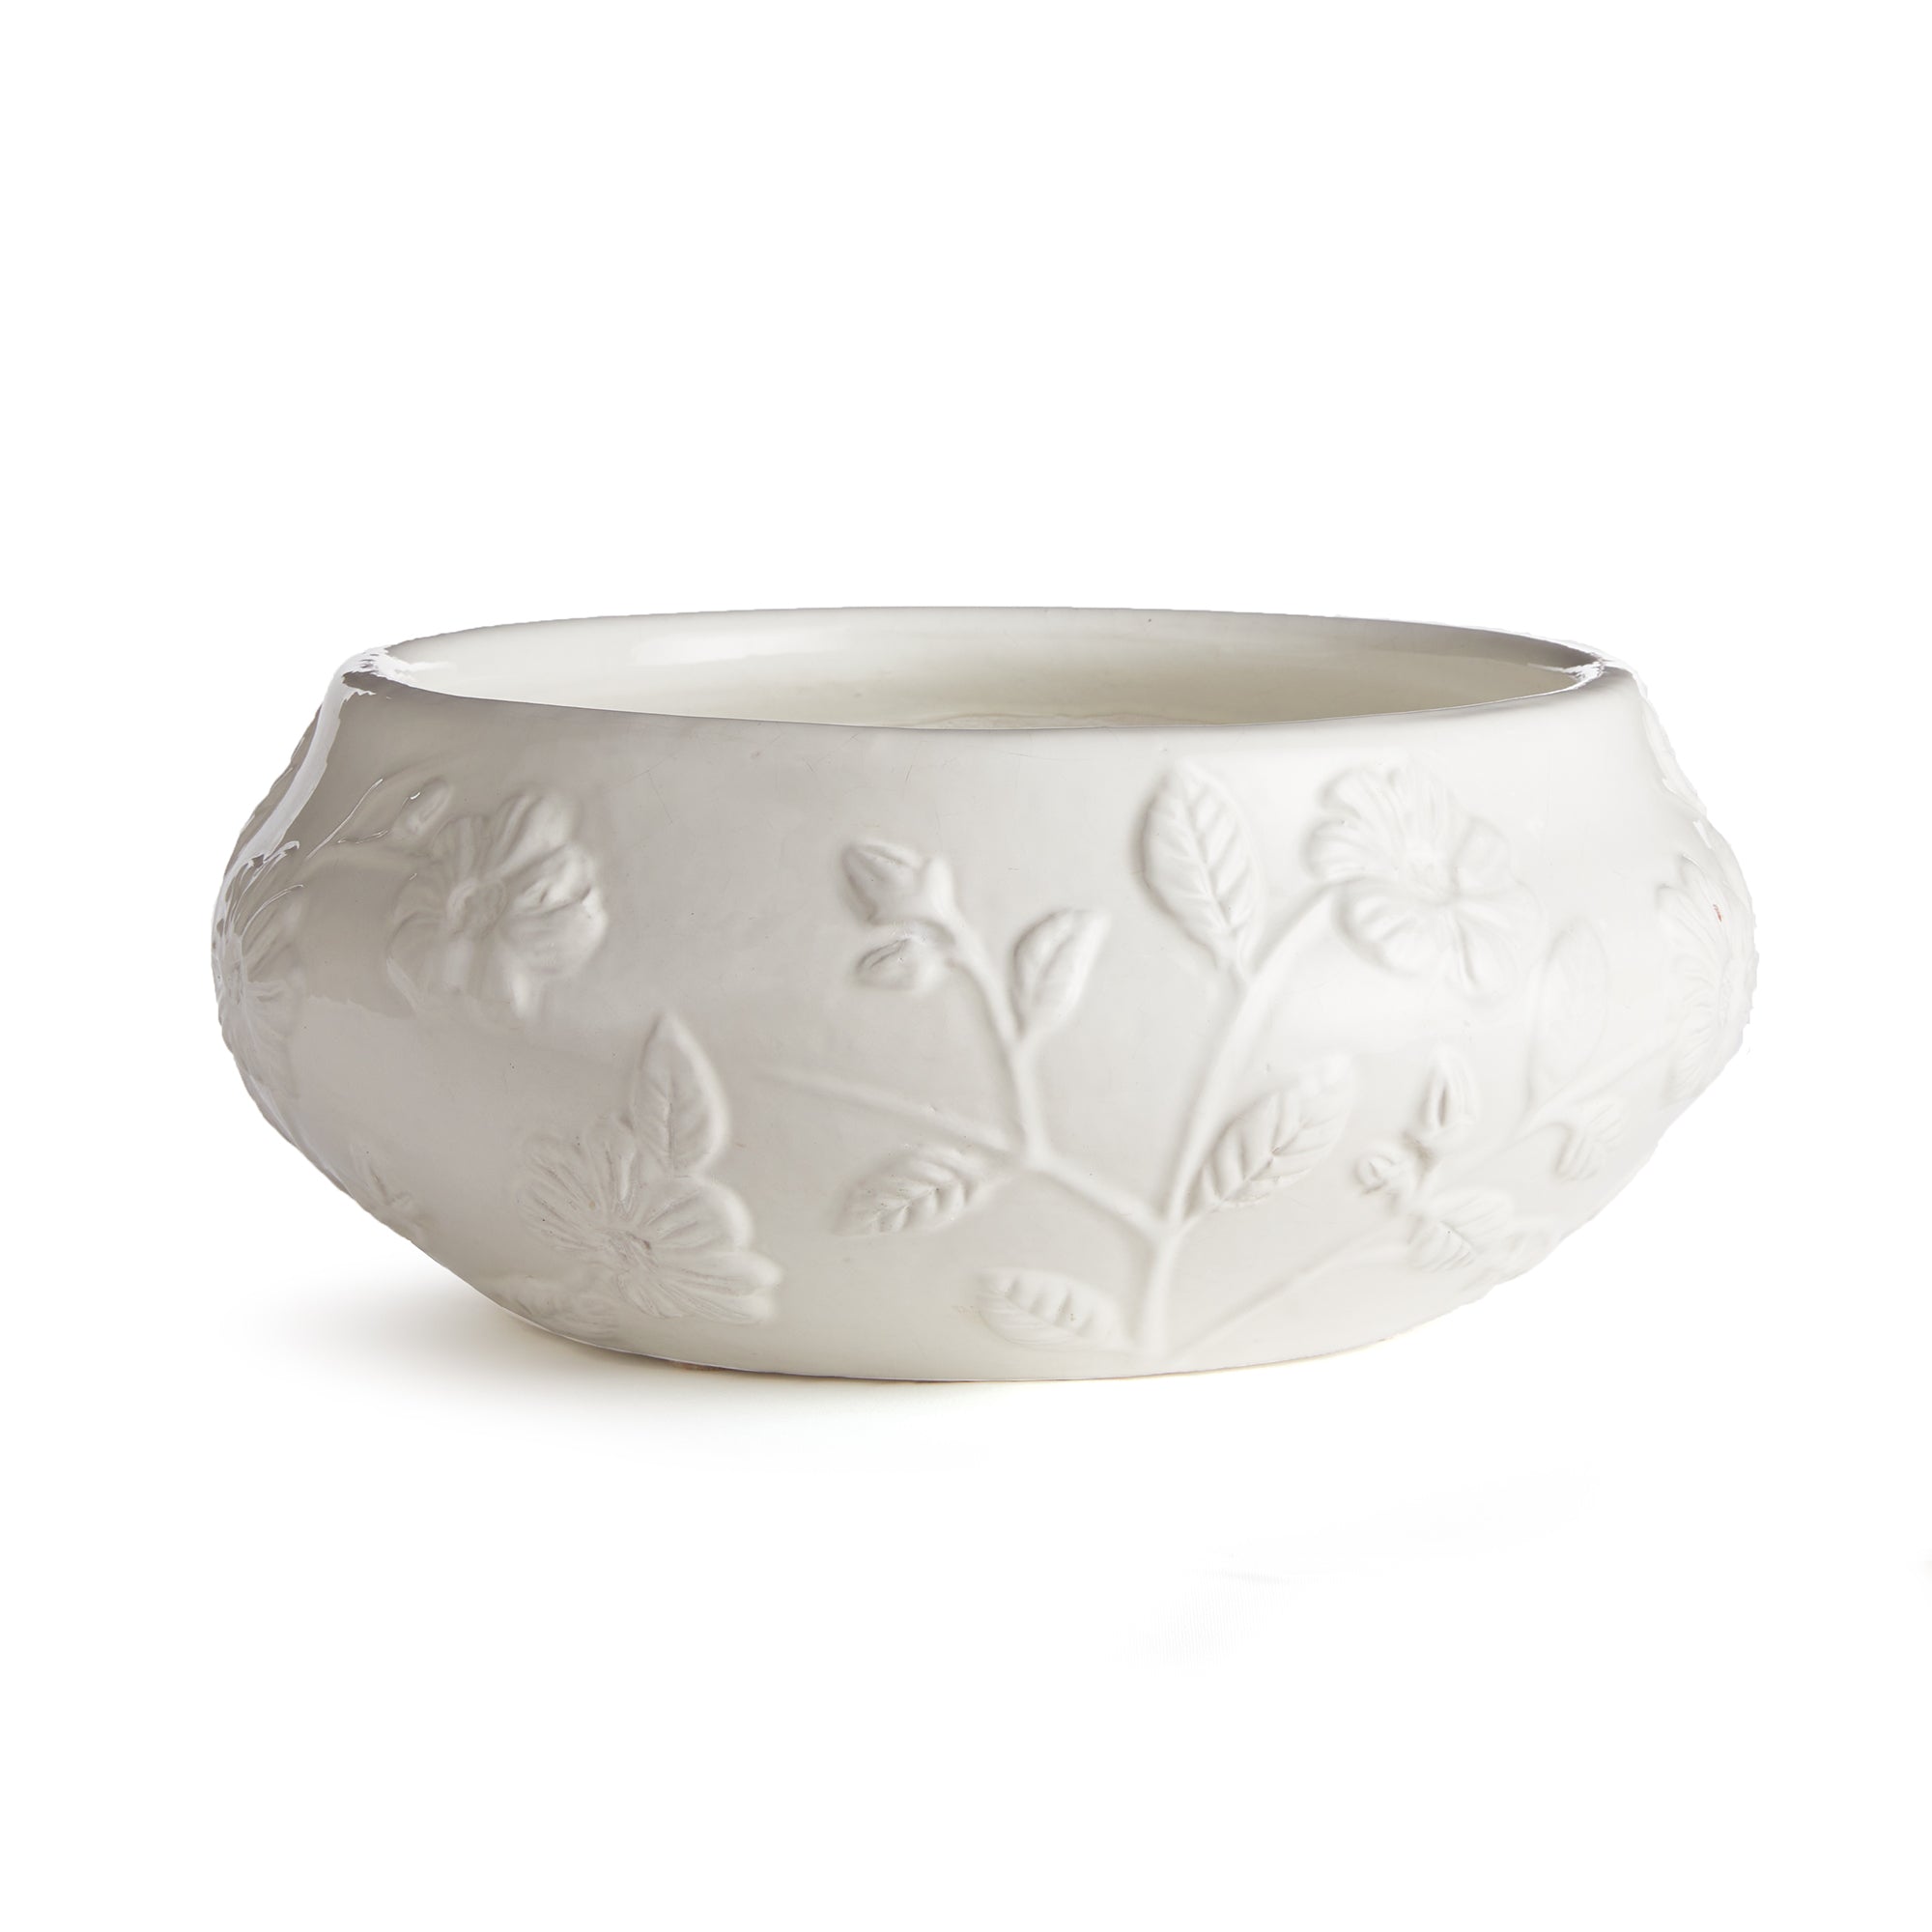 With a low relief floral stem design, this unique Blossom Decorative Bowl is a beautiful addition to the formal space. A glossy bright white glaze and classic shape make it an instant classic. Fill it with your favorite floral drop-in, or just display as is for an elegant look. Amethyst Home provides interior design, new construction, custom furniture, and area rugs in the Austin metro area.